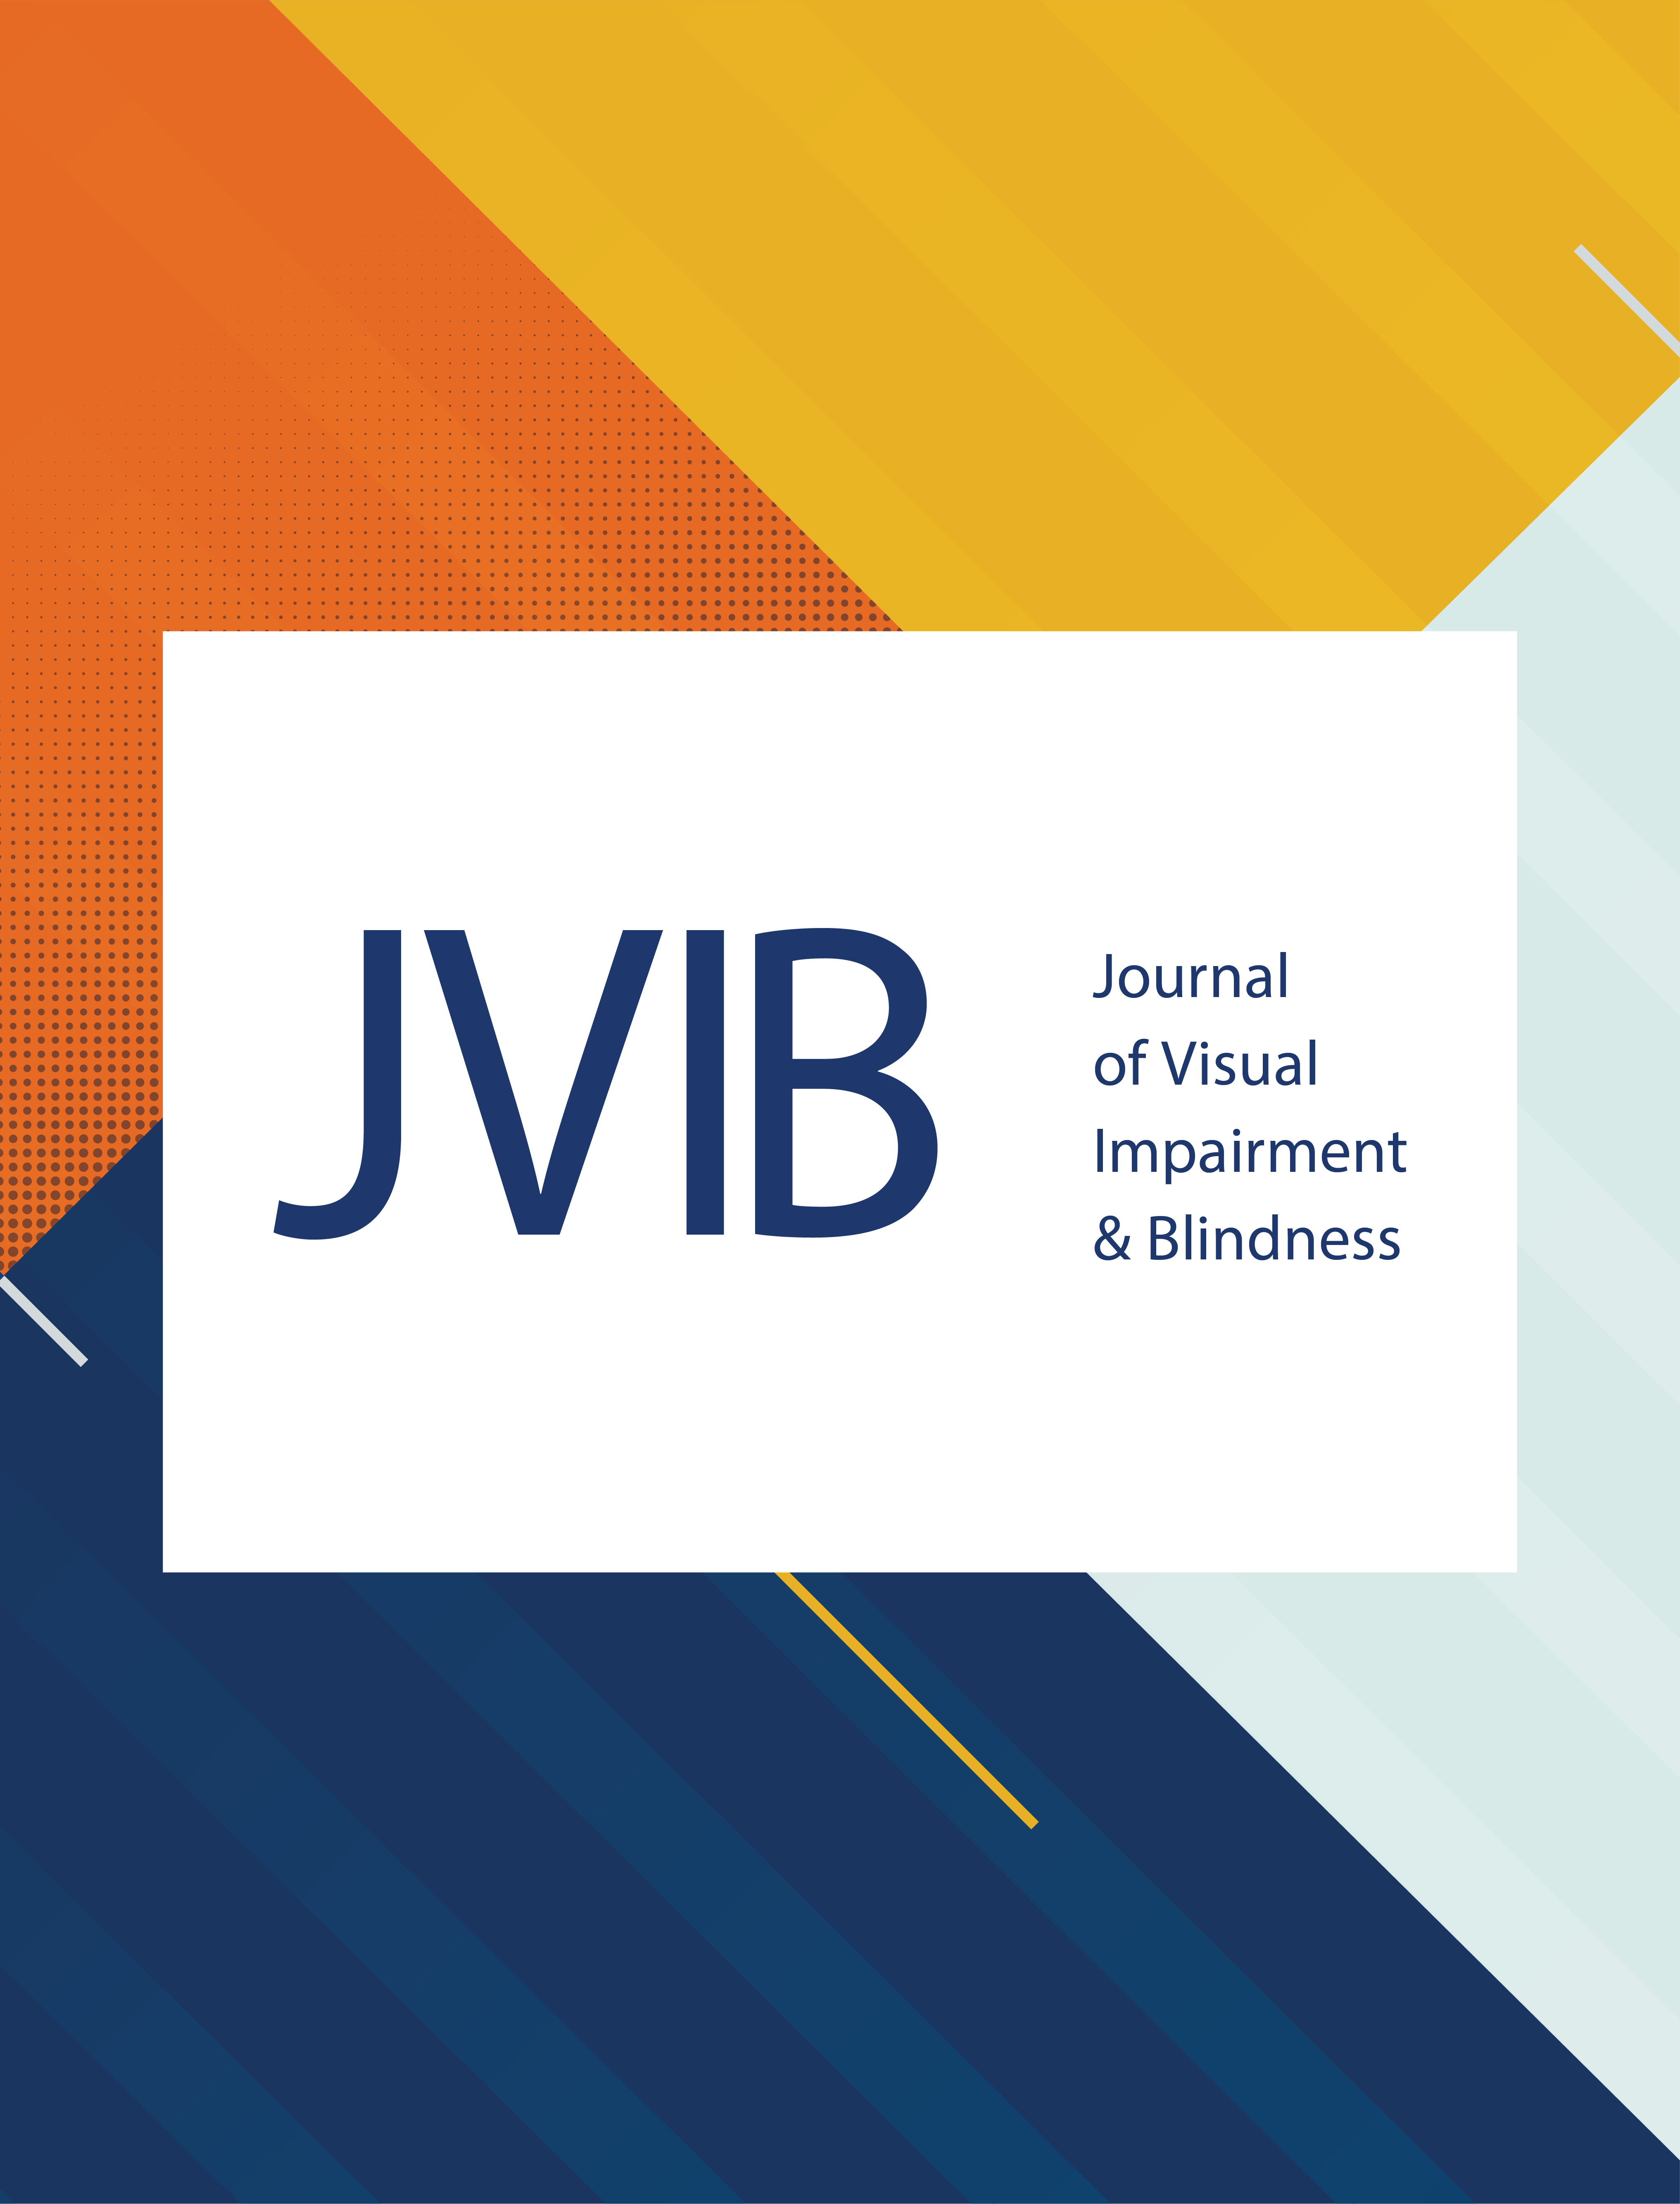 JVIB Journal of Visual Impairment and Blindness